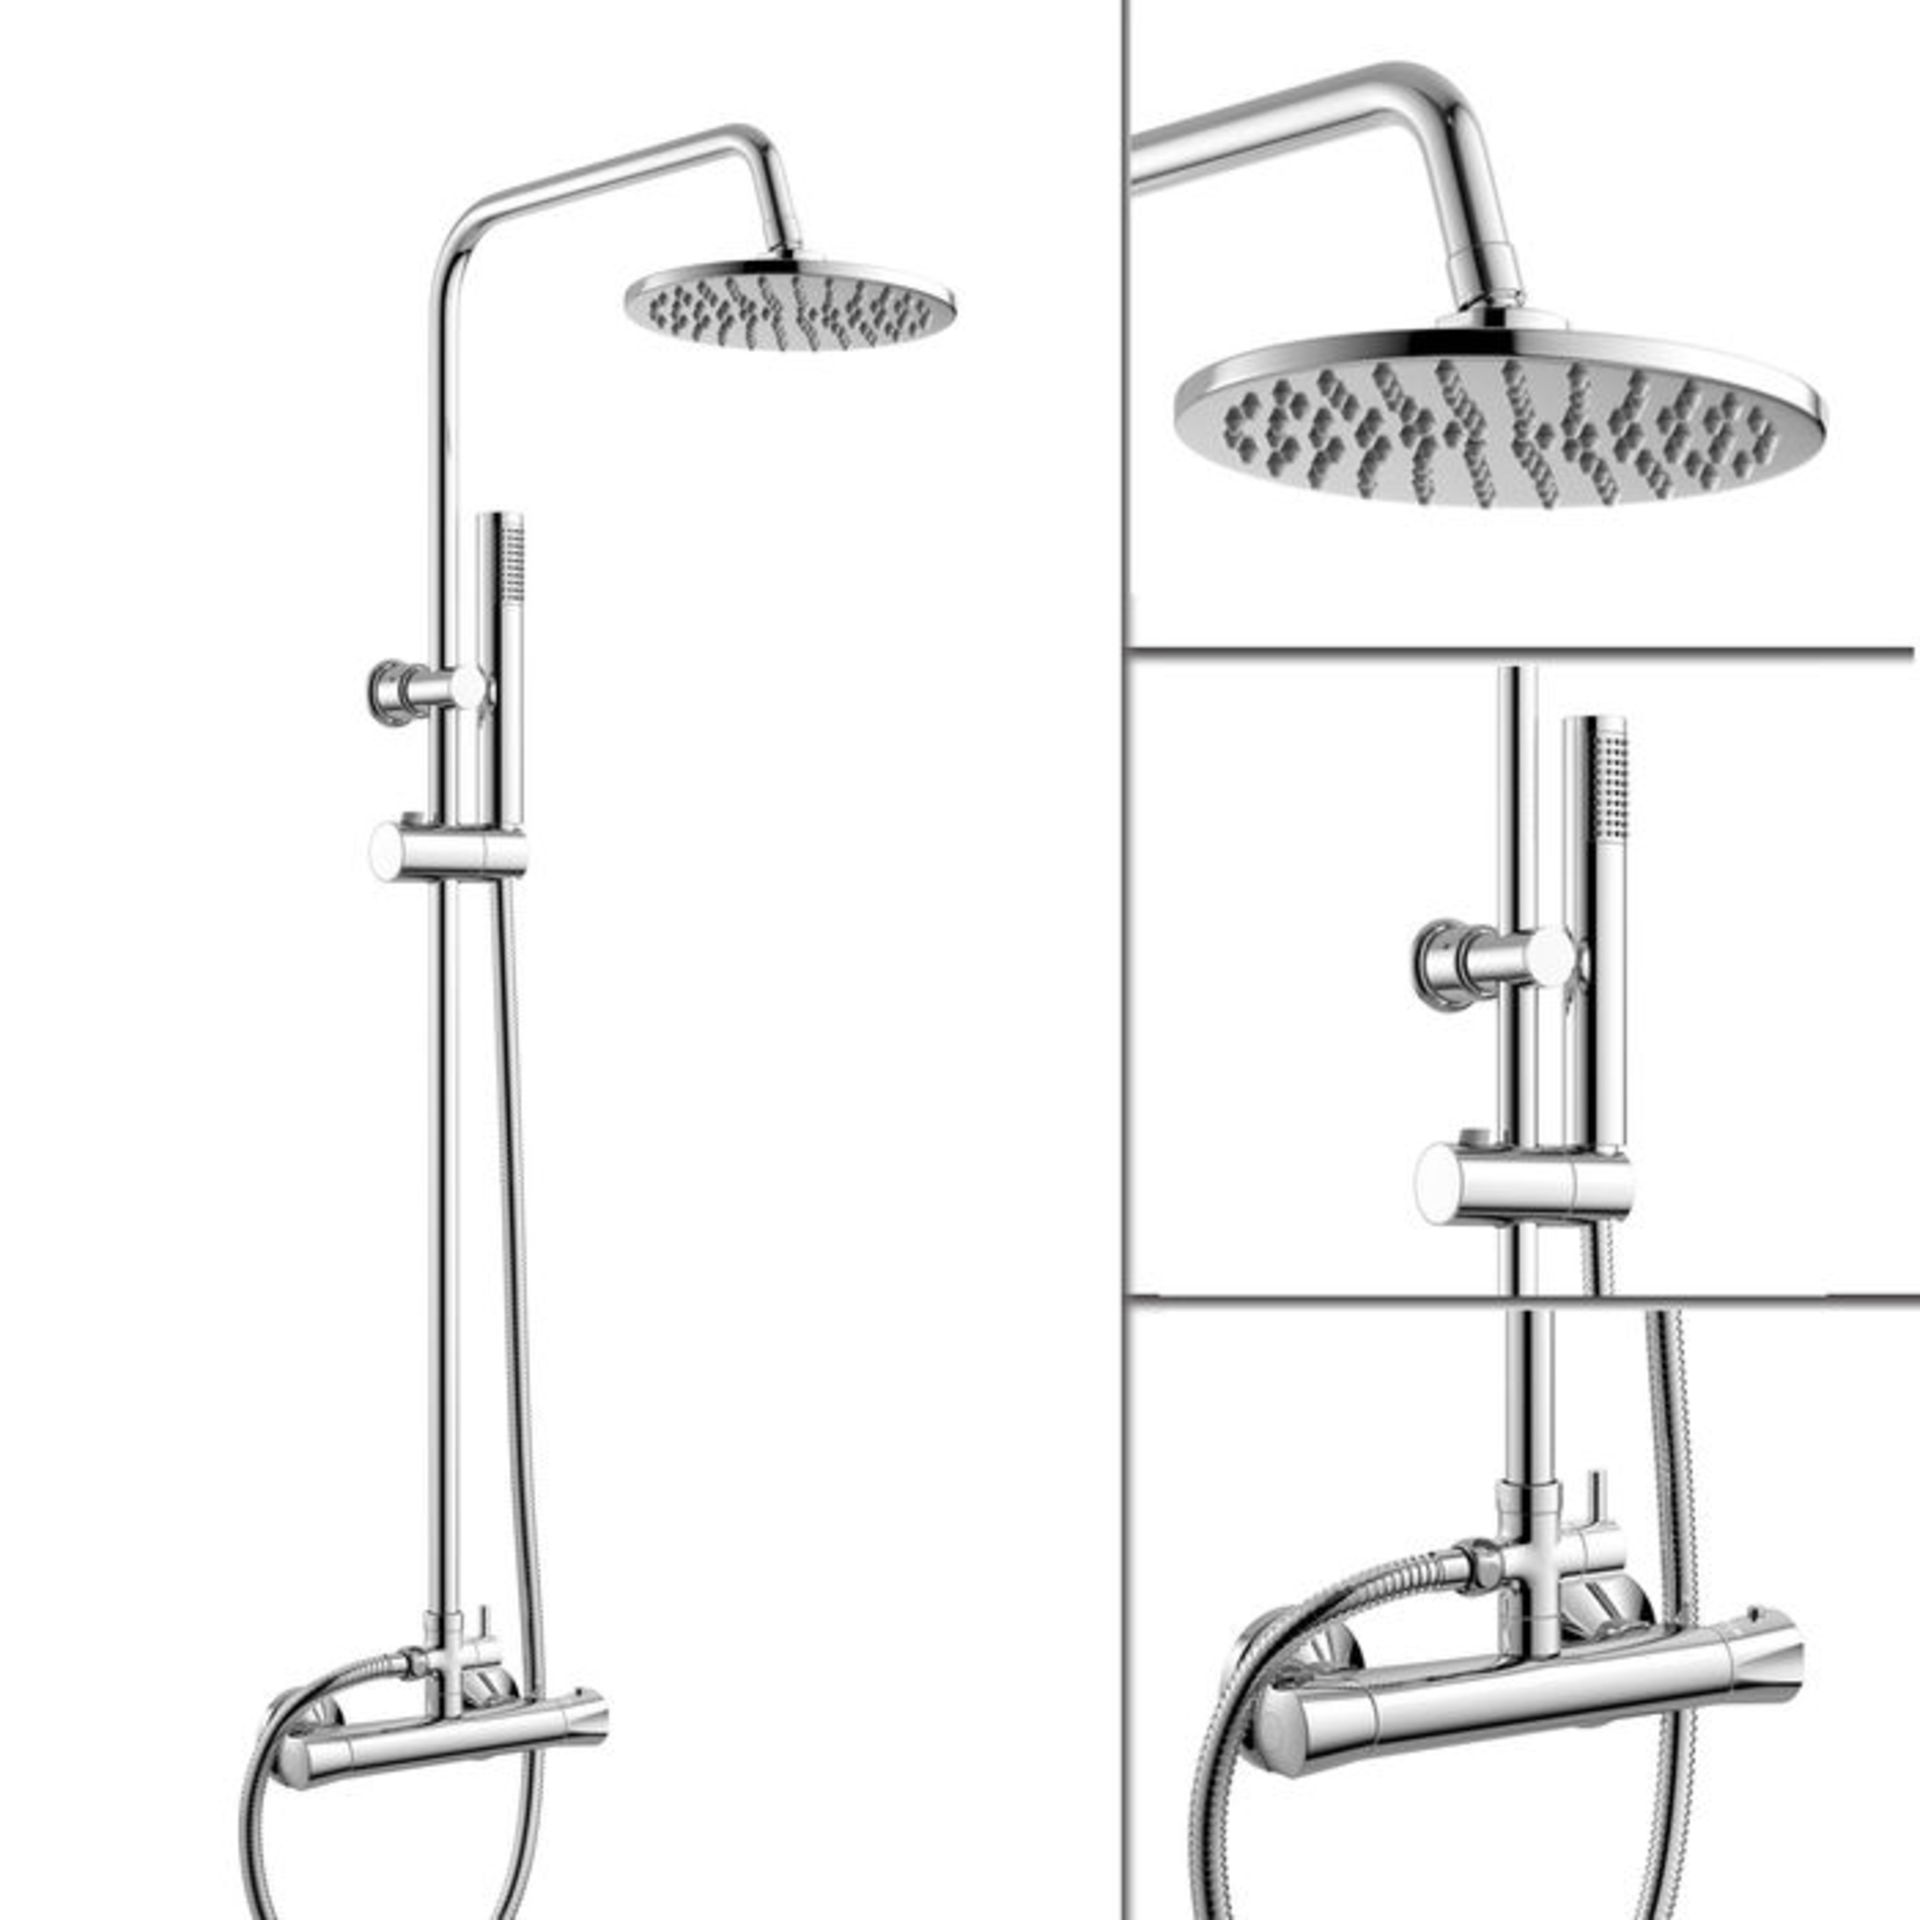 (KL180) Round Exposed Thermostatic Shower Kit & Head. Shower head features a tilt action for maximum - Image 2 of 2